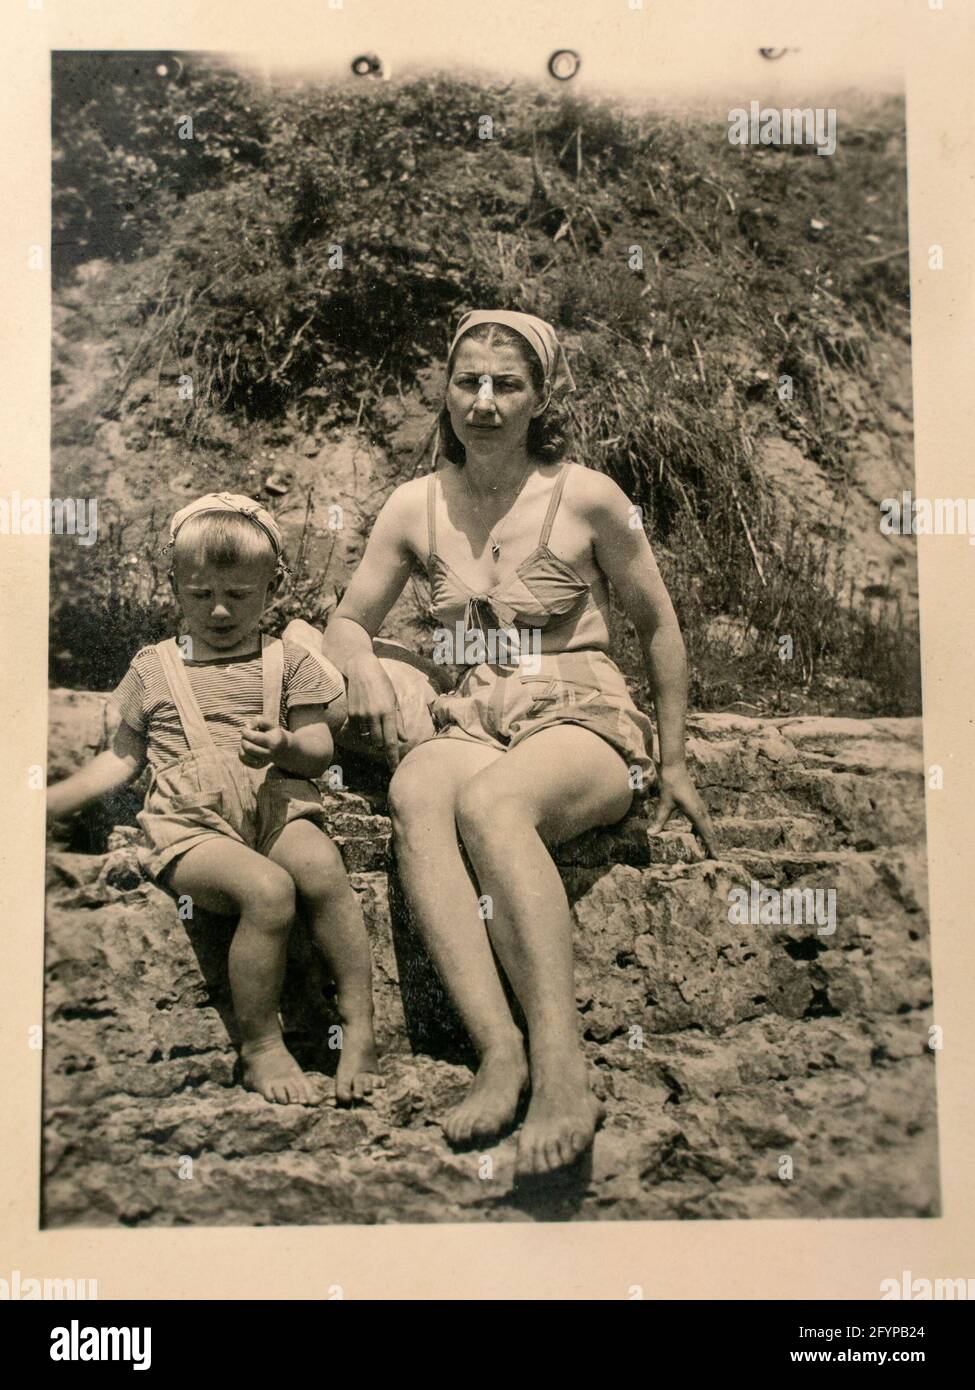 Germany - CIRCA 1930s: Mother and small kid sitting in beach. Vintage archive Art Deco era photography Stock Photo